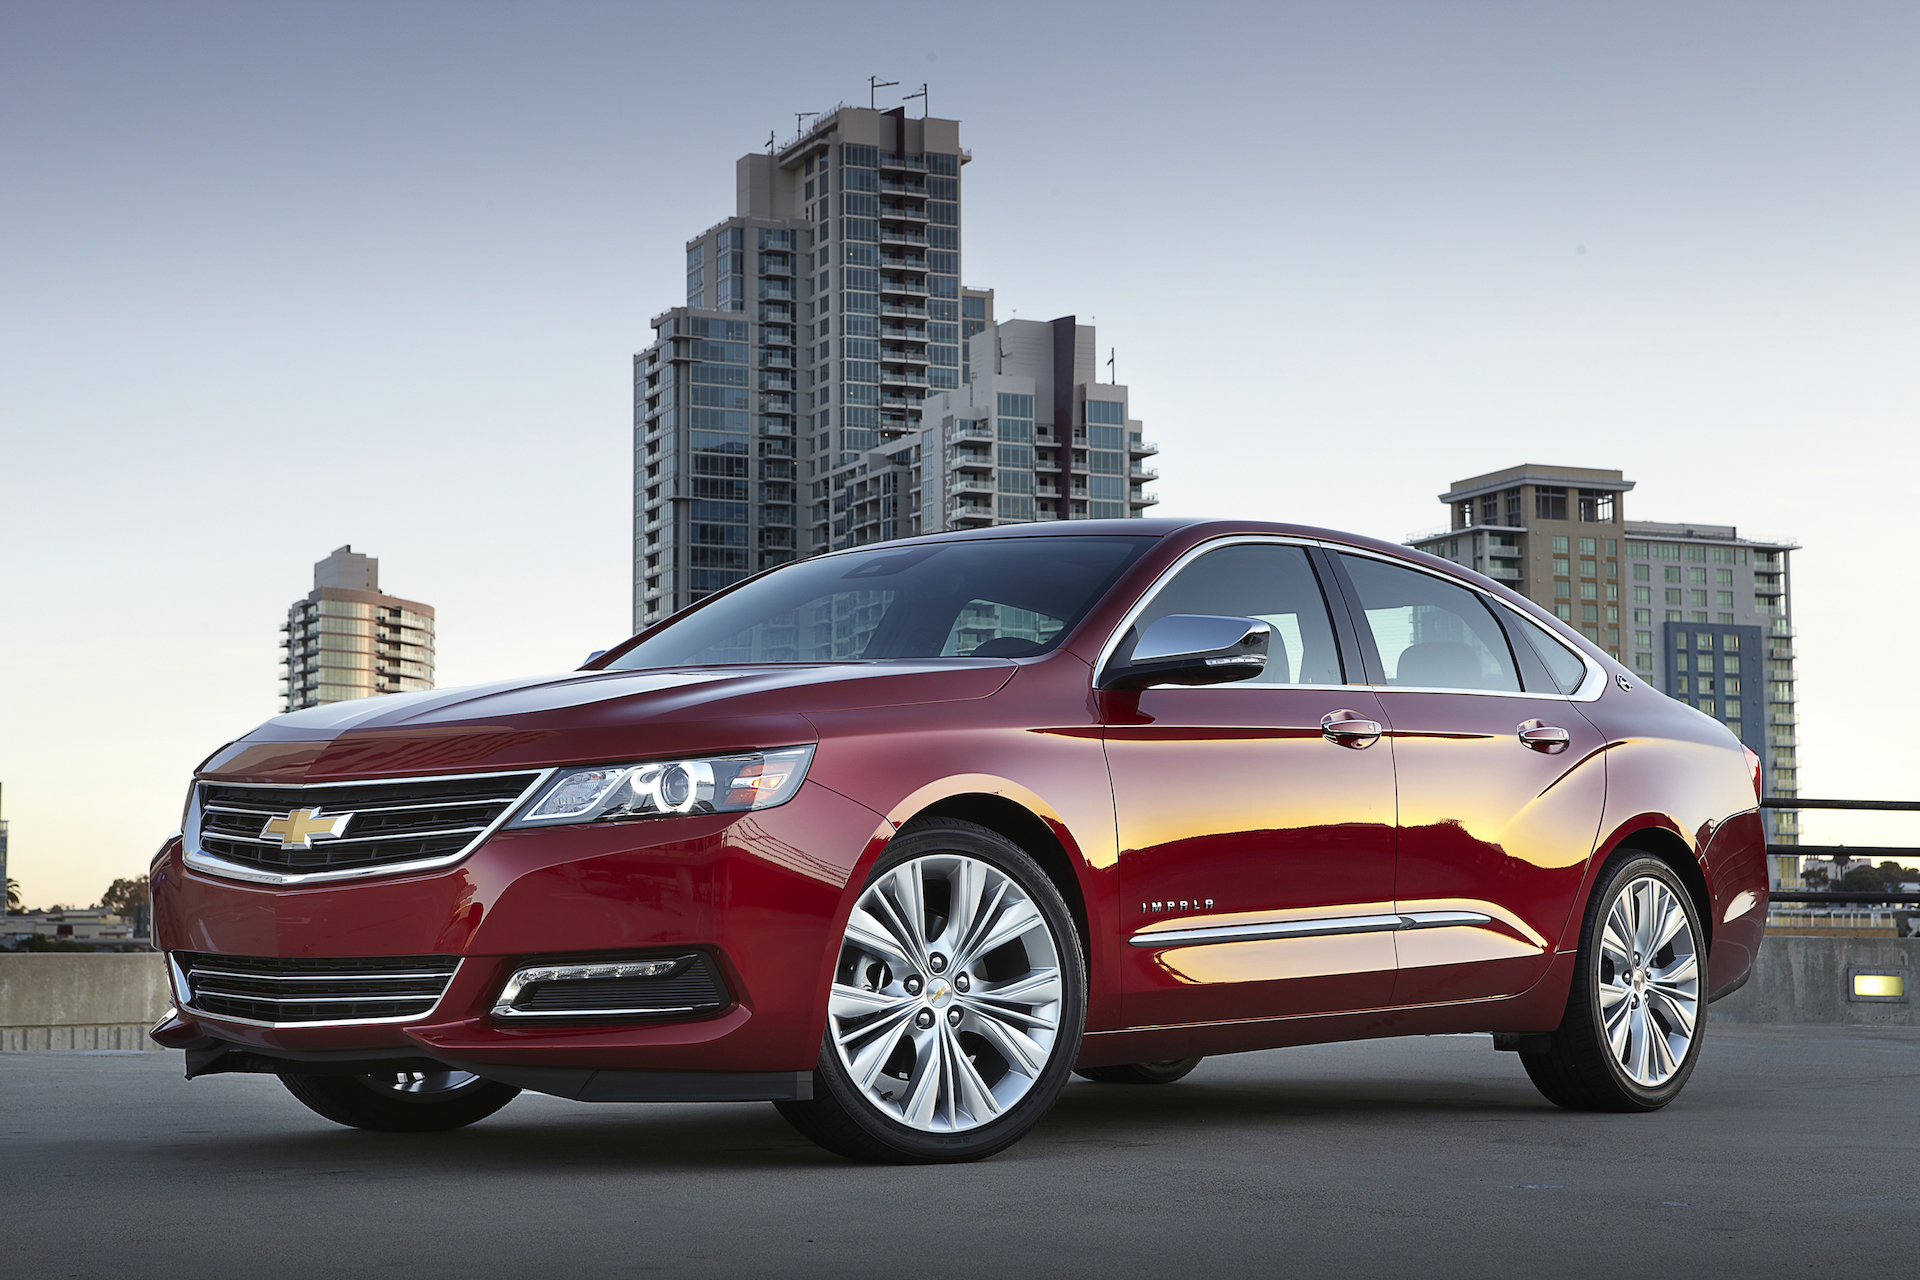 2016 Chevrolet Impala prices and expert review - The Car Connection